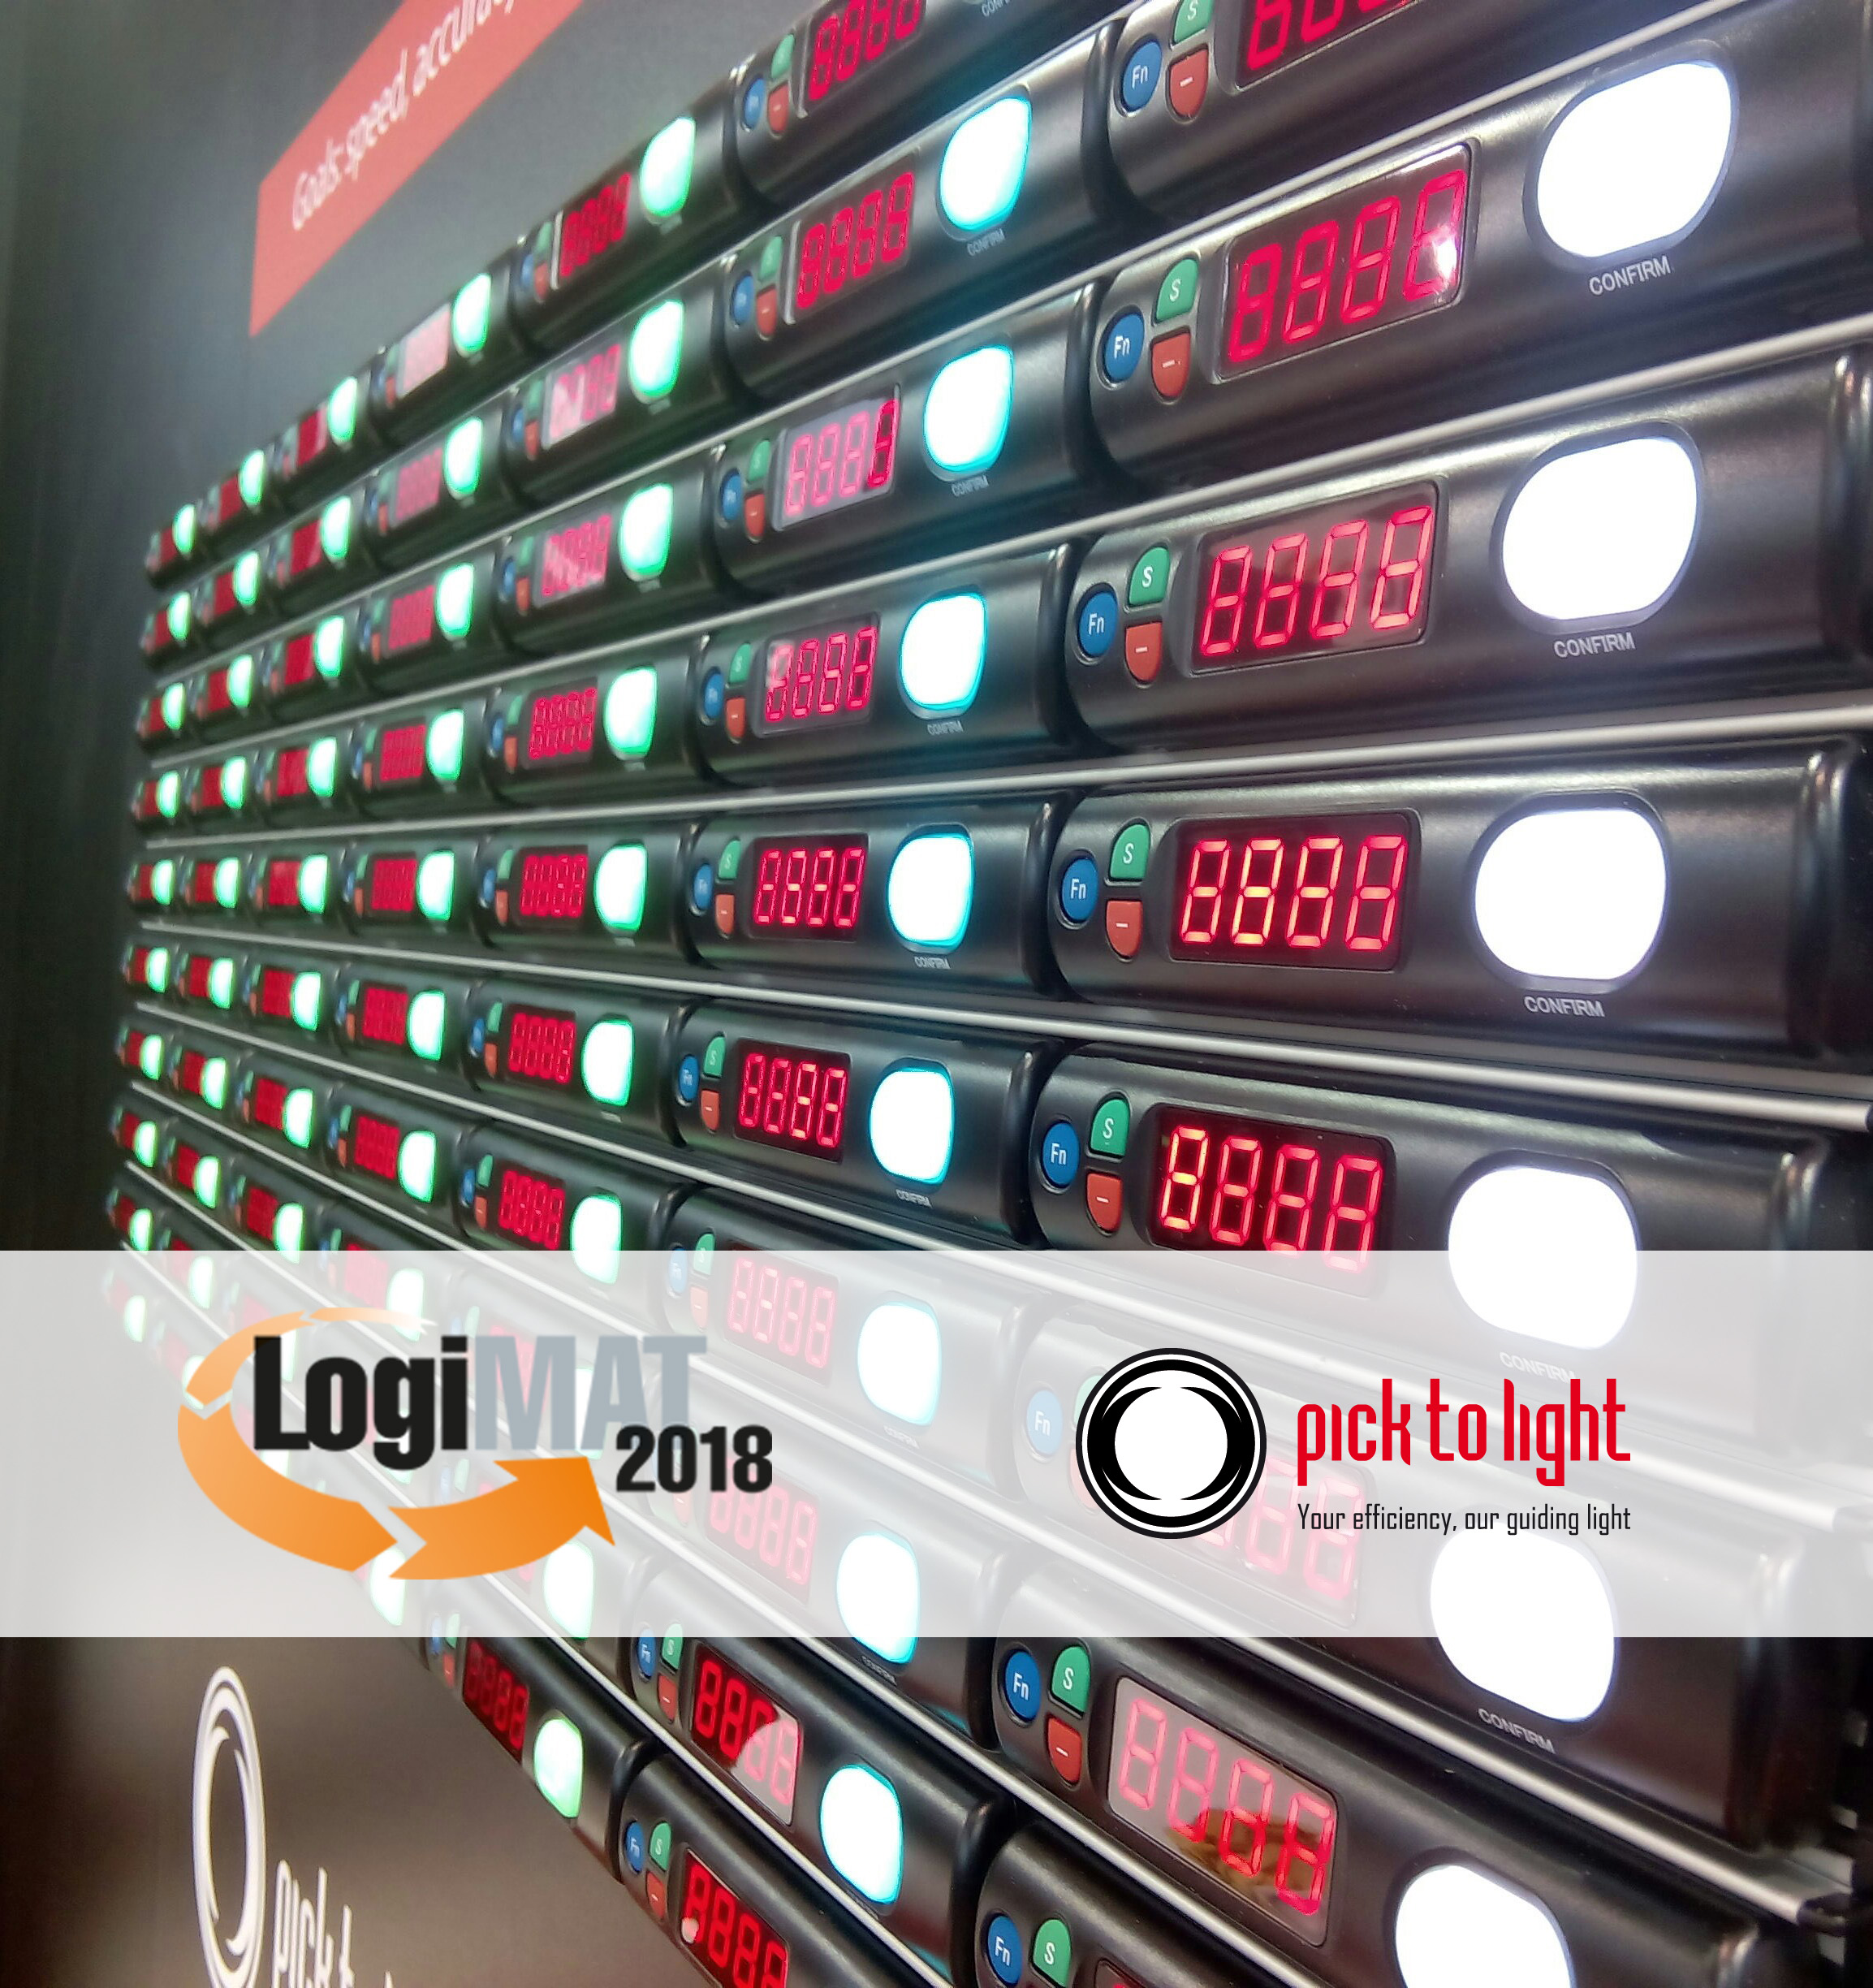 Pick To Light Systems present once again at the 16th edition of LOGIMAT